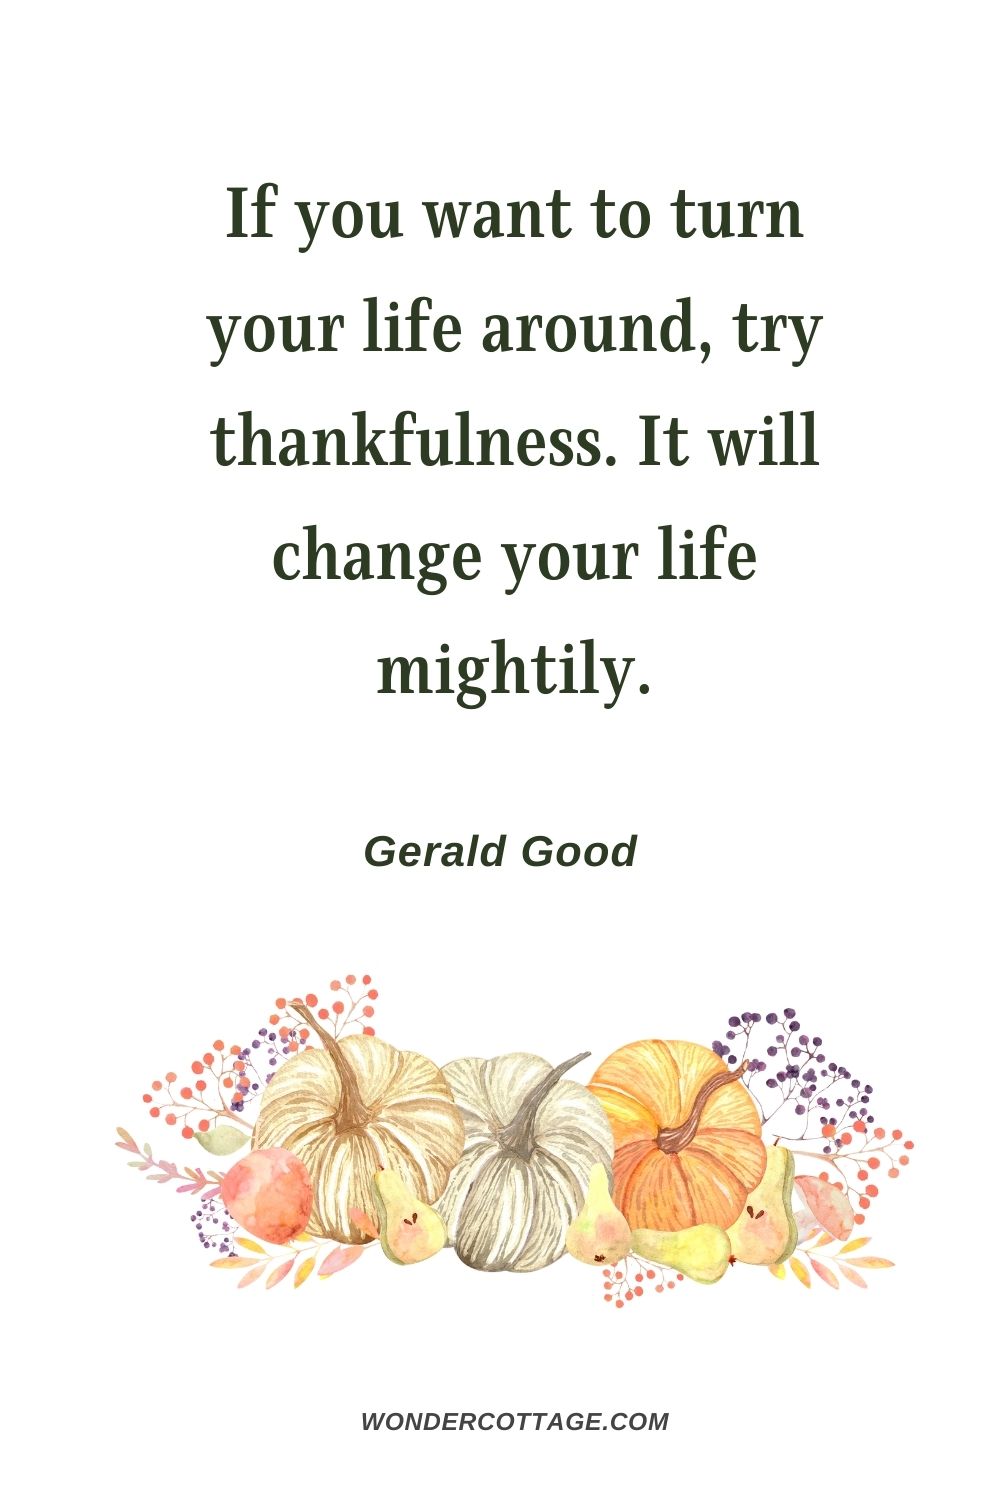 If you want to turn your life around, try thankfulness. It will change your life mightily. Gerald Good